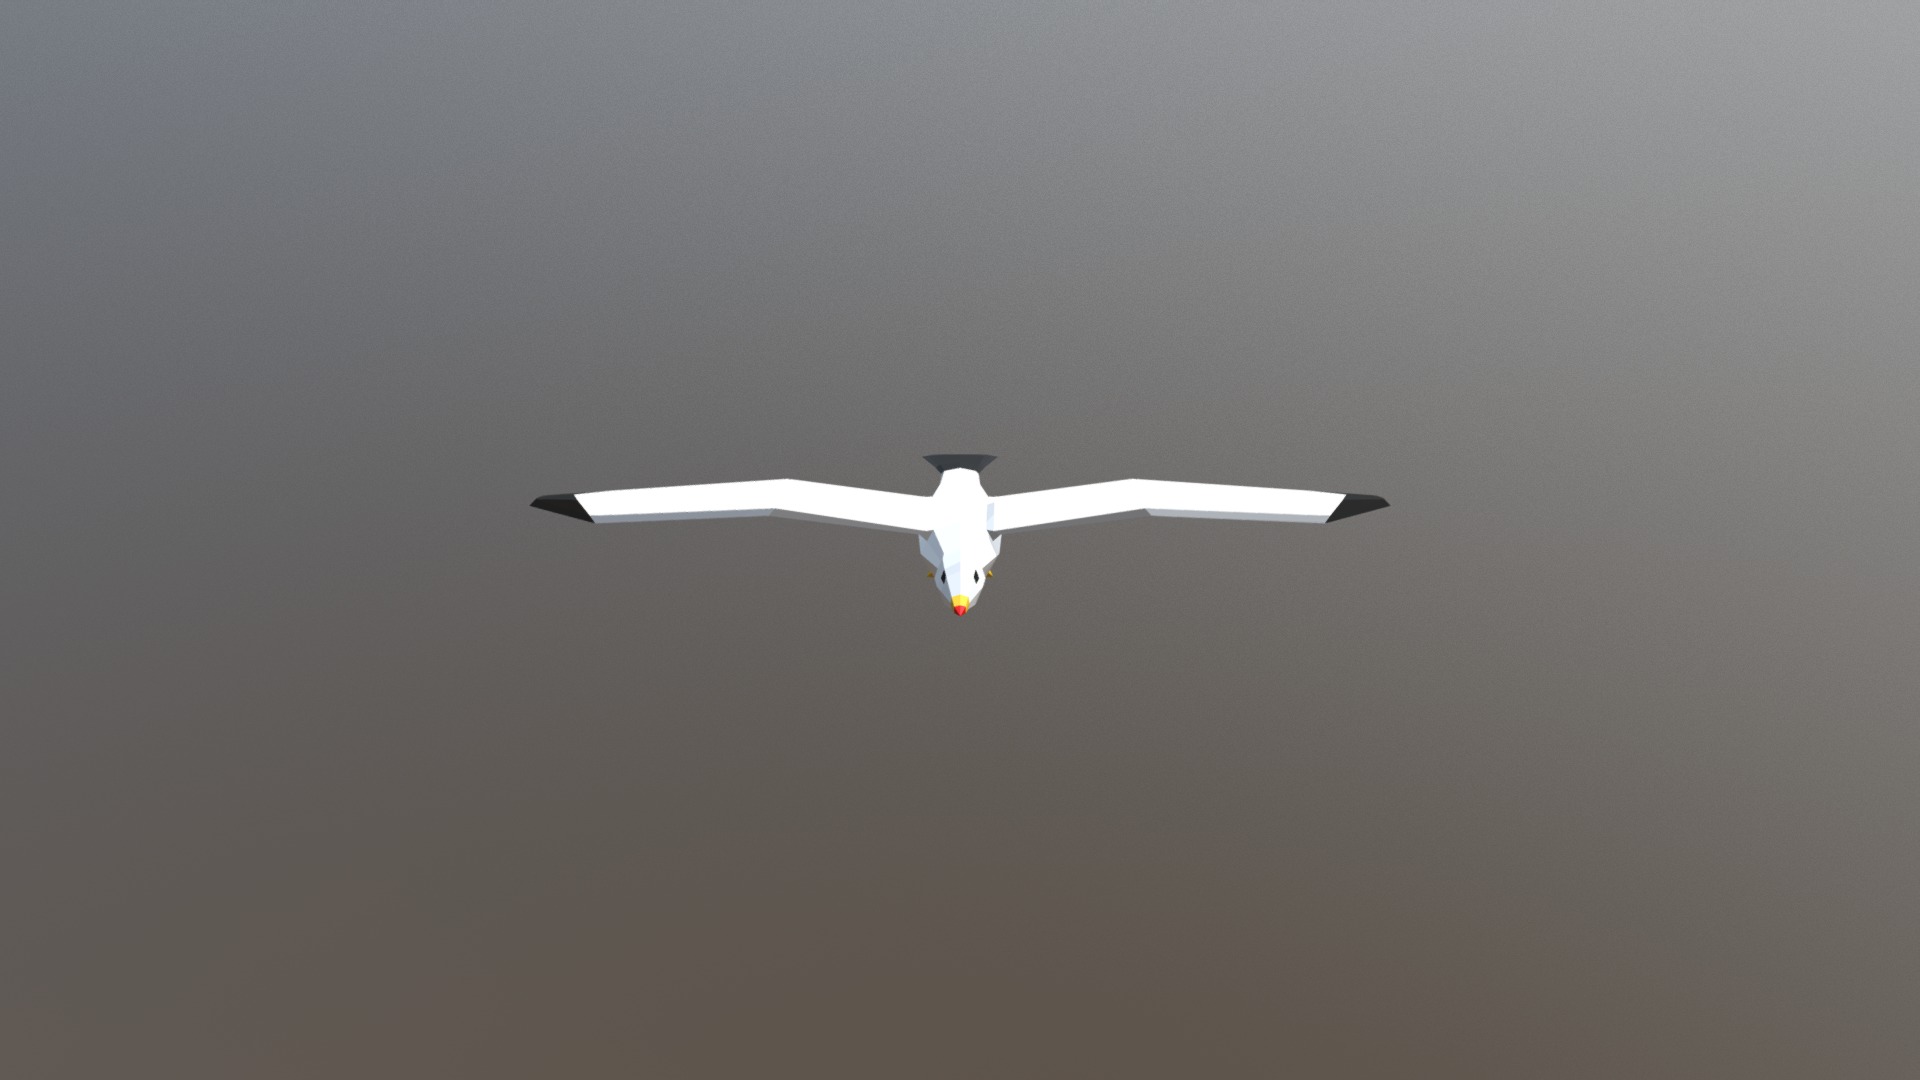 3D model Low Poly Seagull - This is a 3D model of the Low Poly Seagull. The 3D model is about a bird flying in the sky.